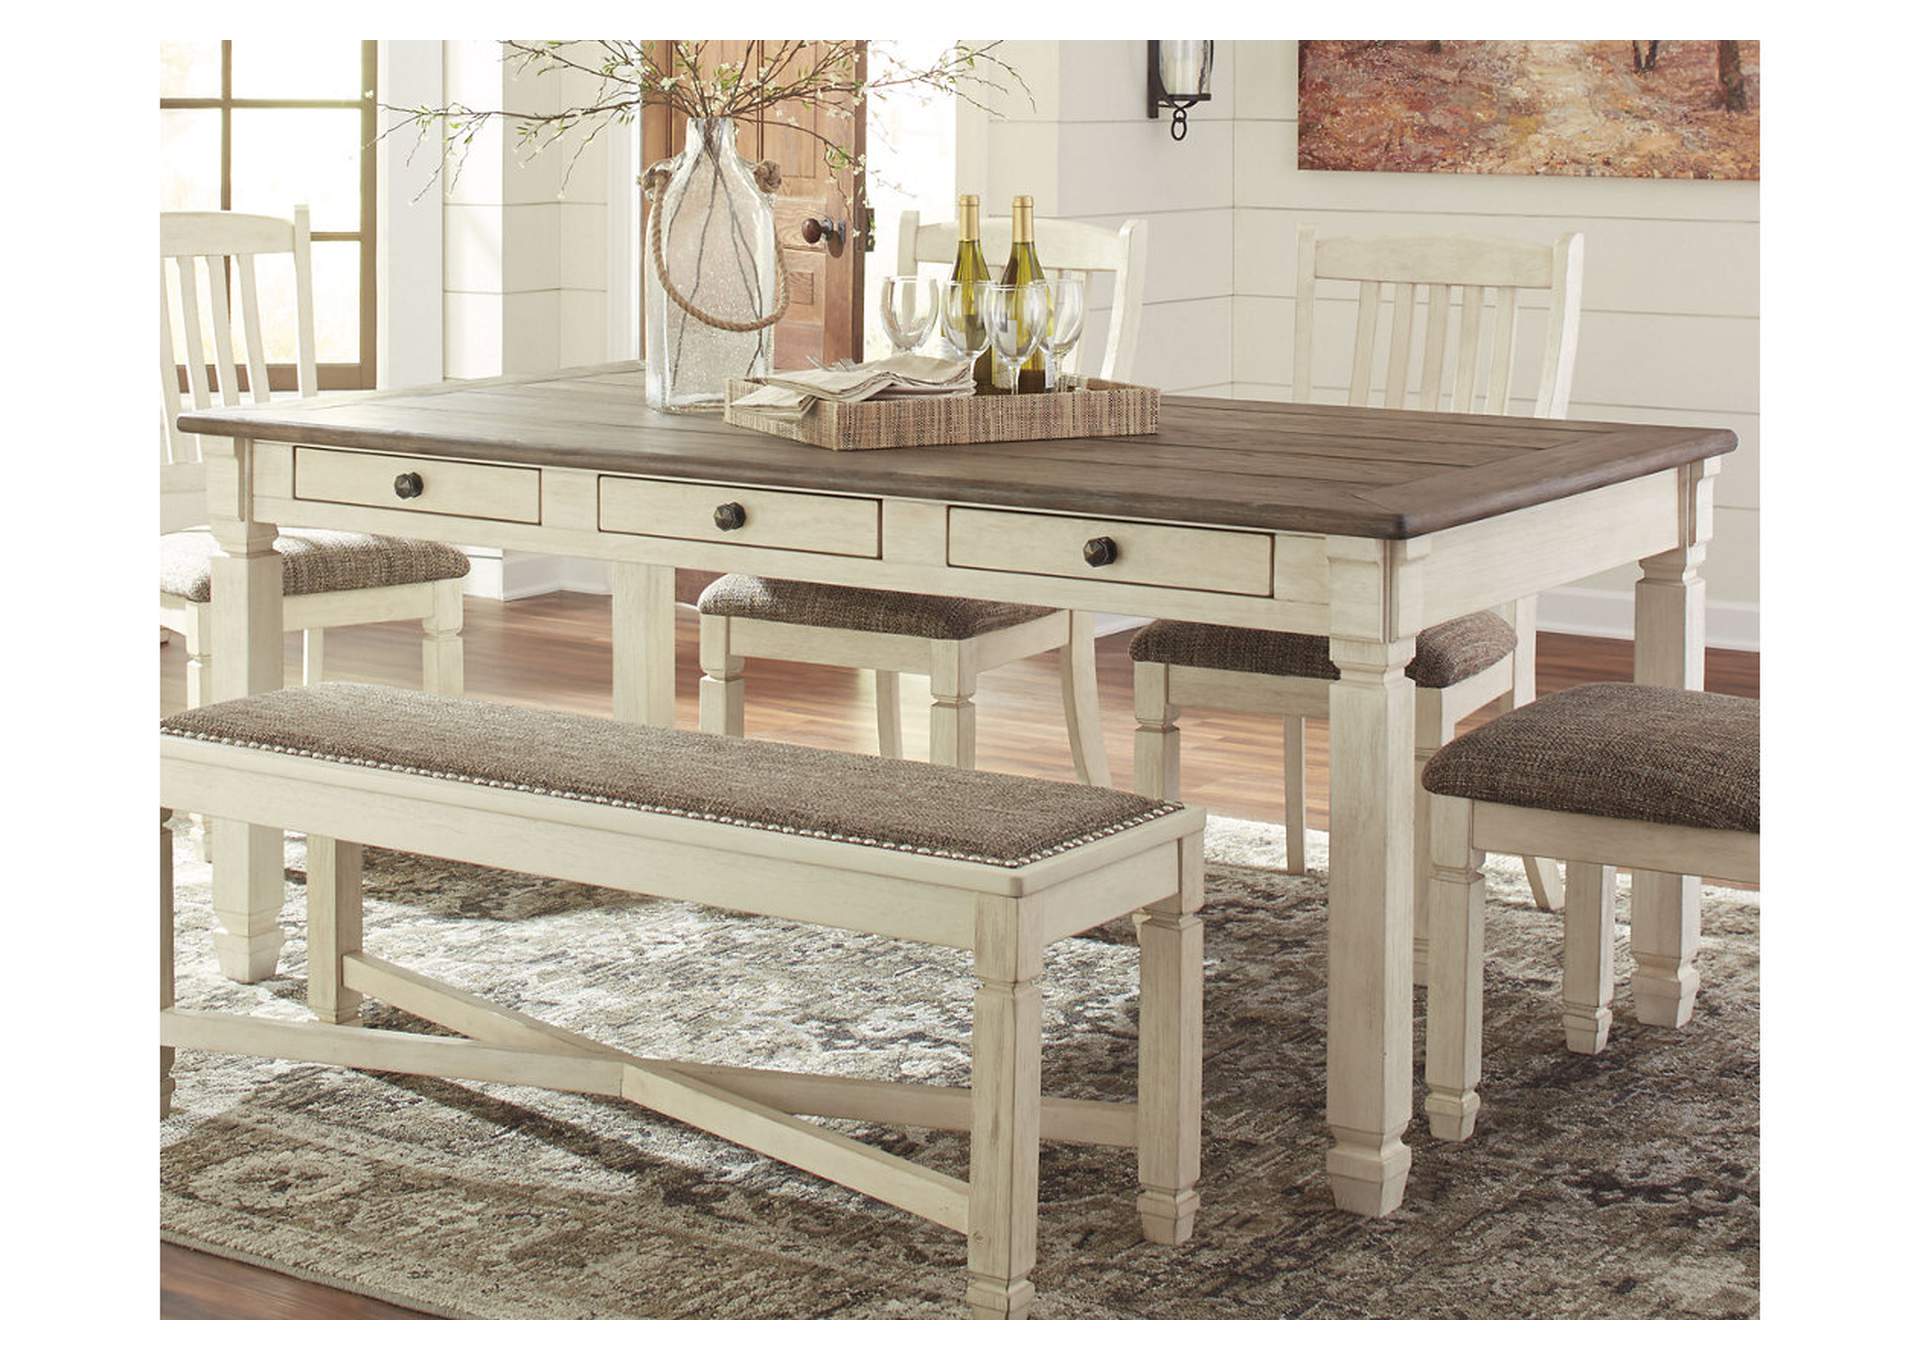 Bolanburg Dining Table with 4 Chairs,Signature Design By Ashley